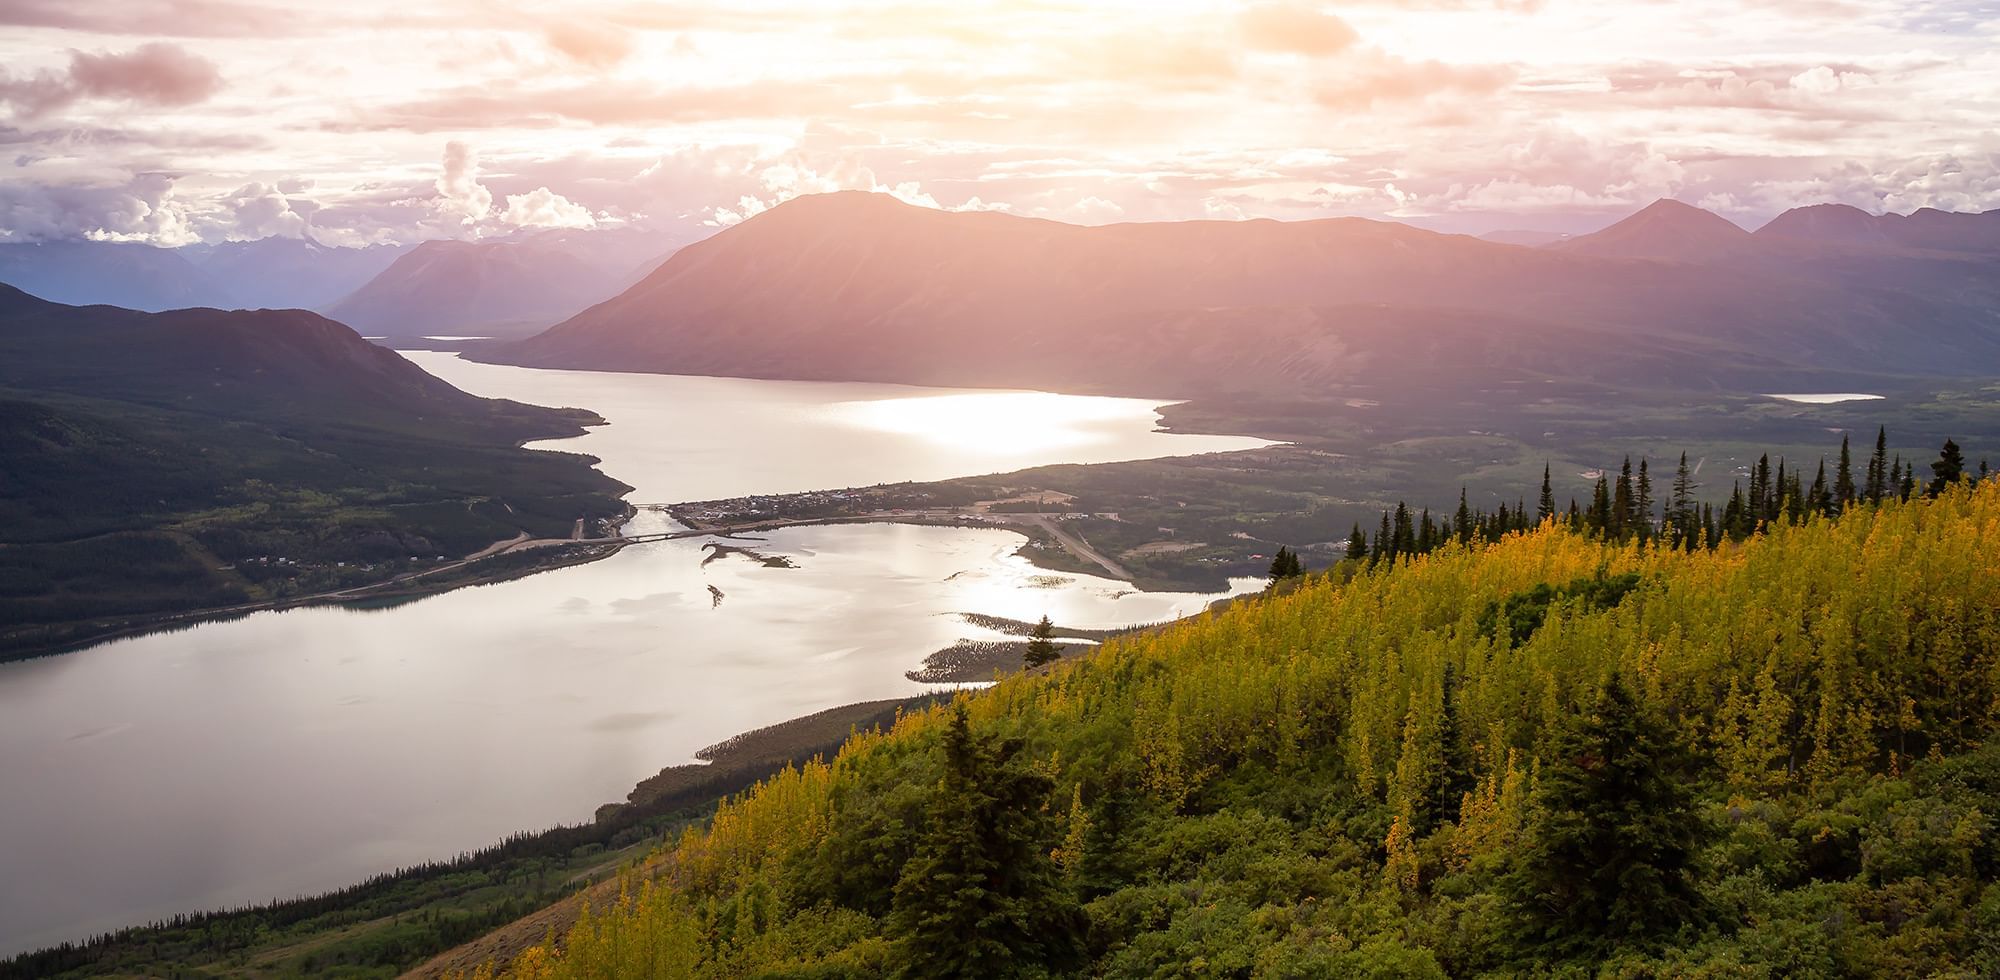 View of the river in the Yukon from a mountain top captured during sunset near Eldorado, a Coast Hotel